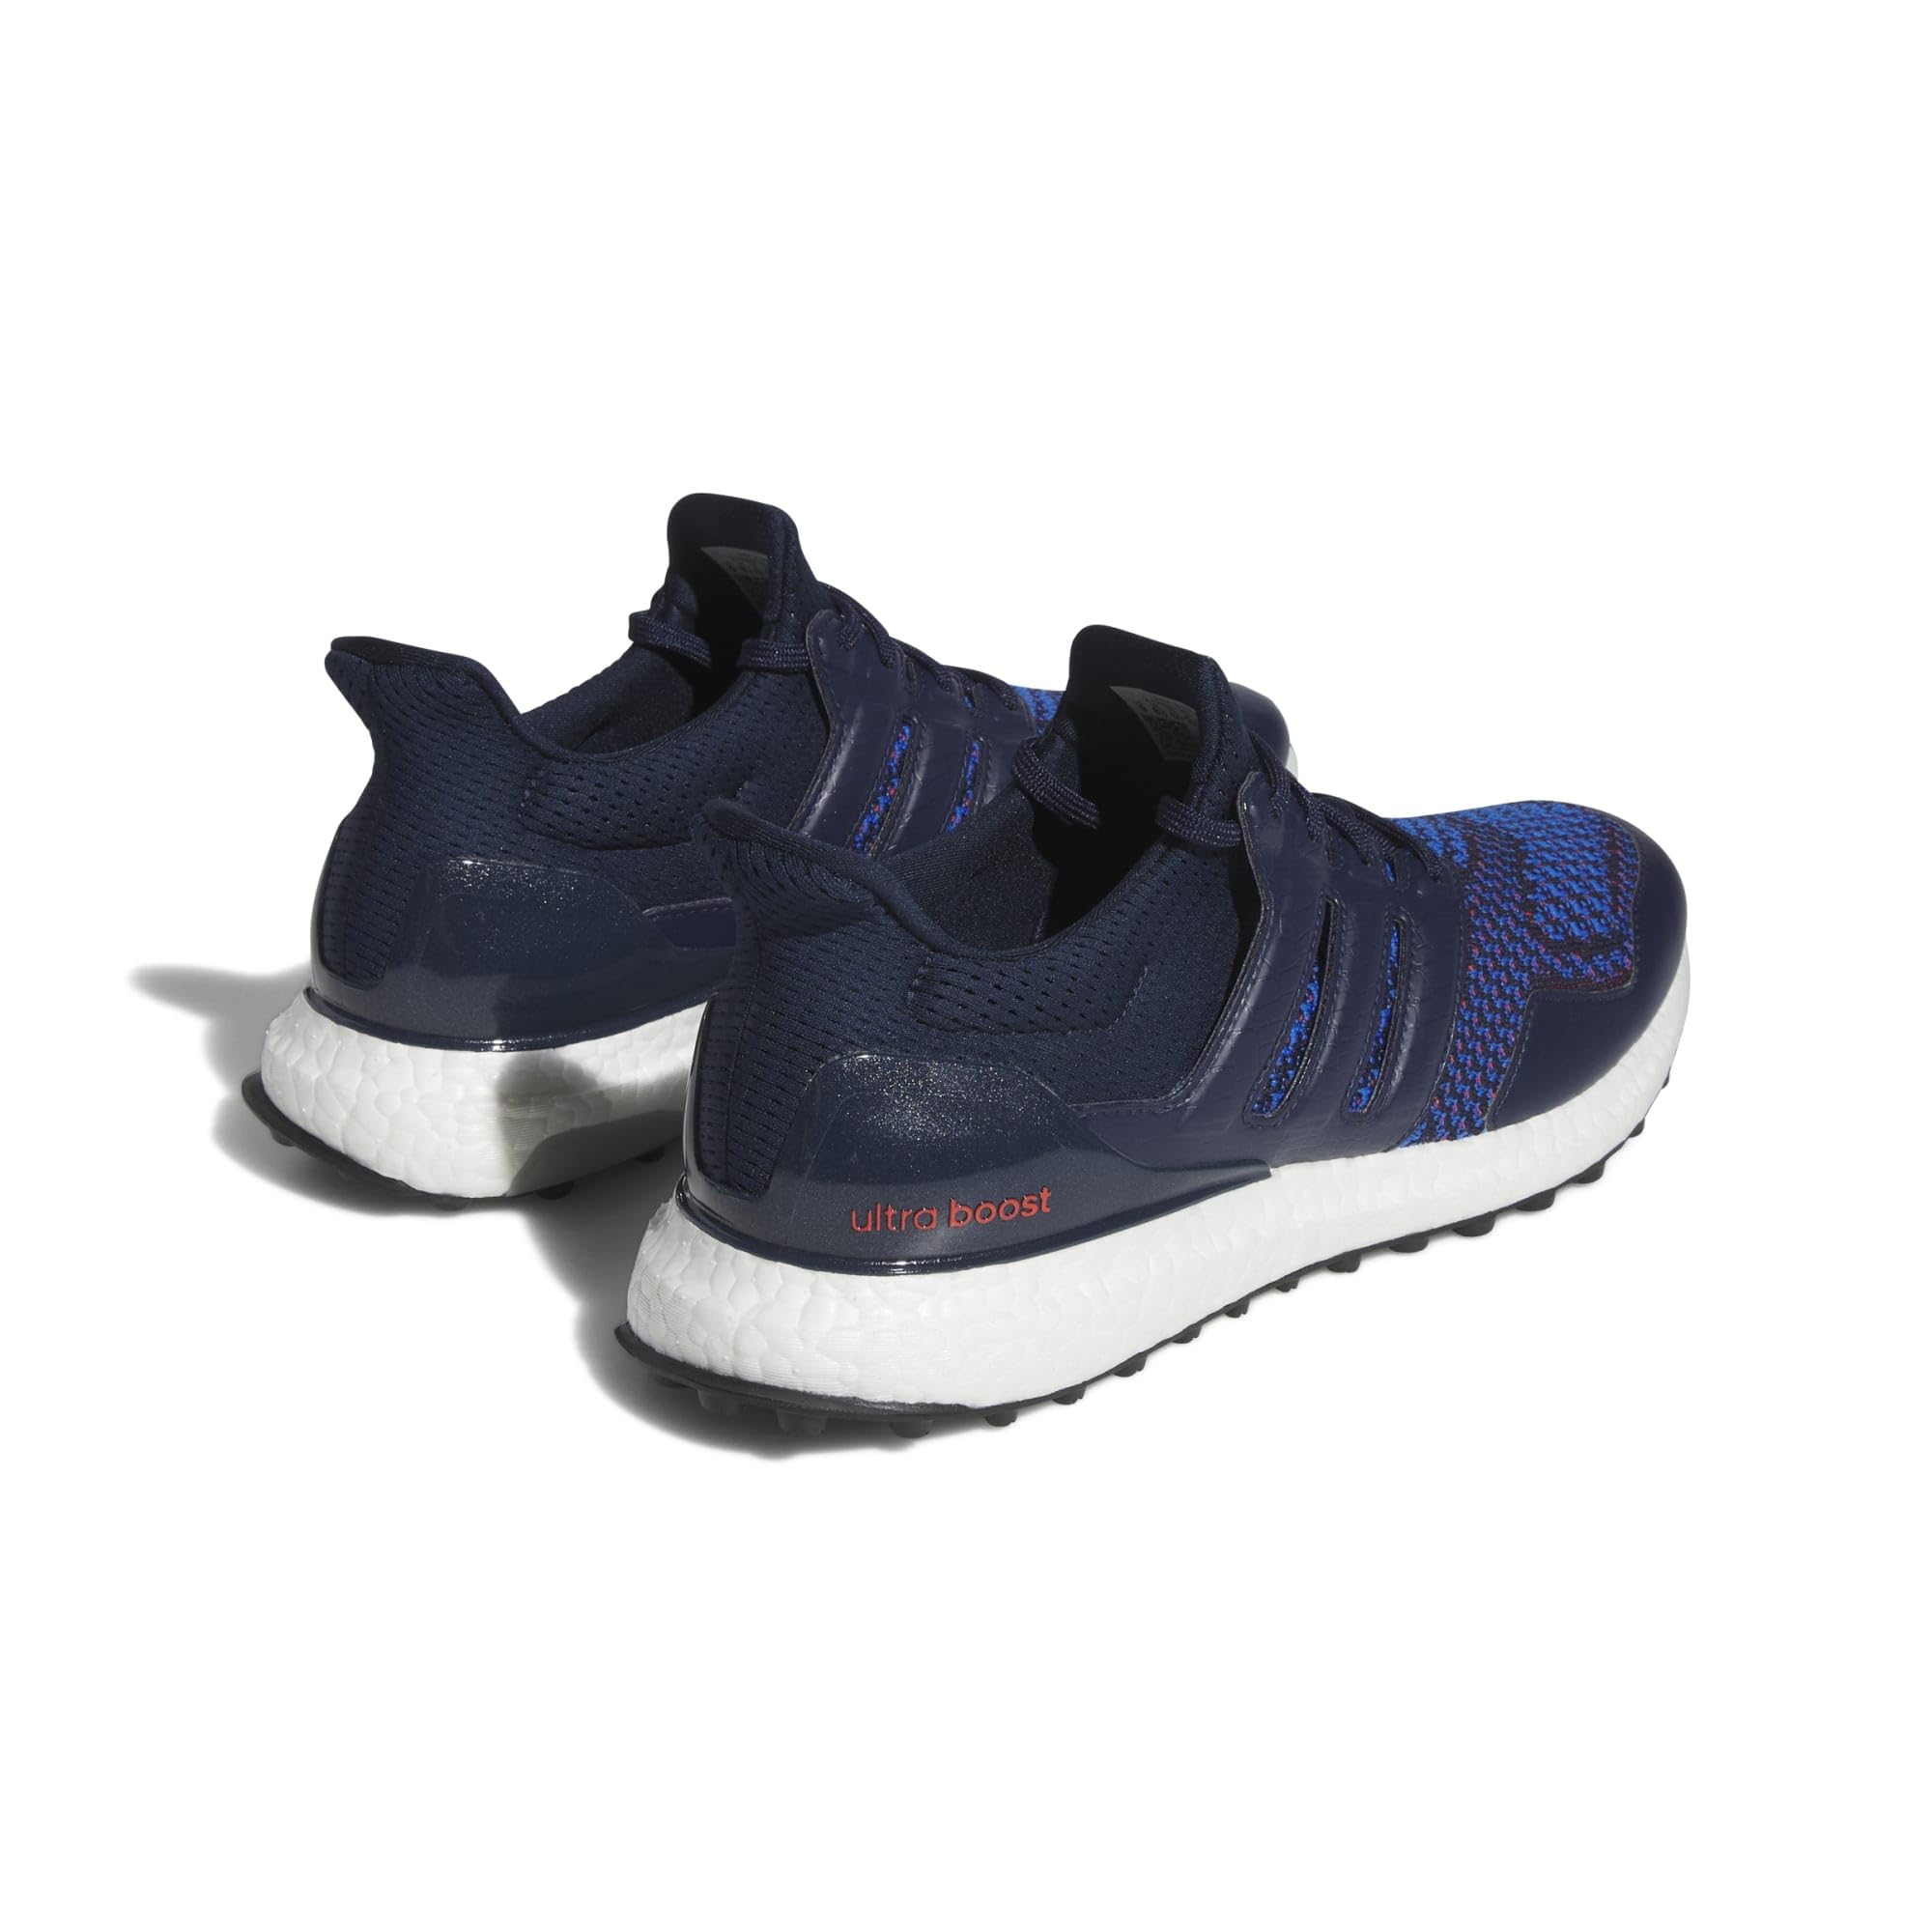 Кроссовки adidas Golf Ultraboost Golf Shoes men s golf travel shoes outdoor golf sneakers men s grass golf training shoes non slip golf shoes quick laces golf size 39 45